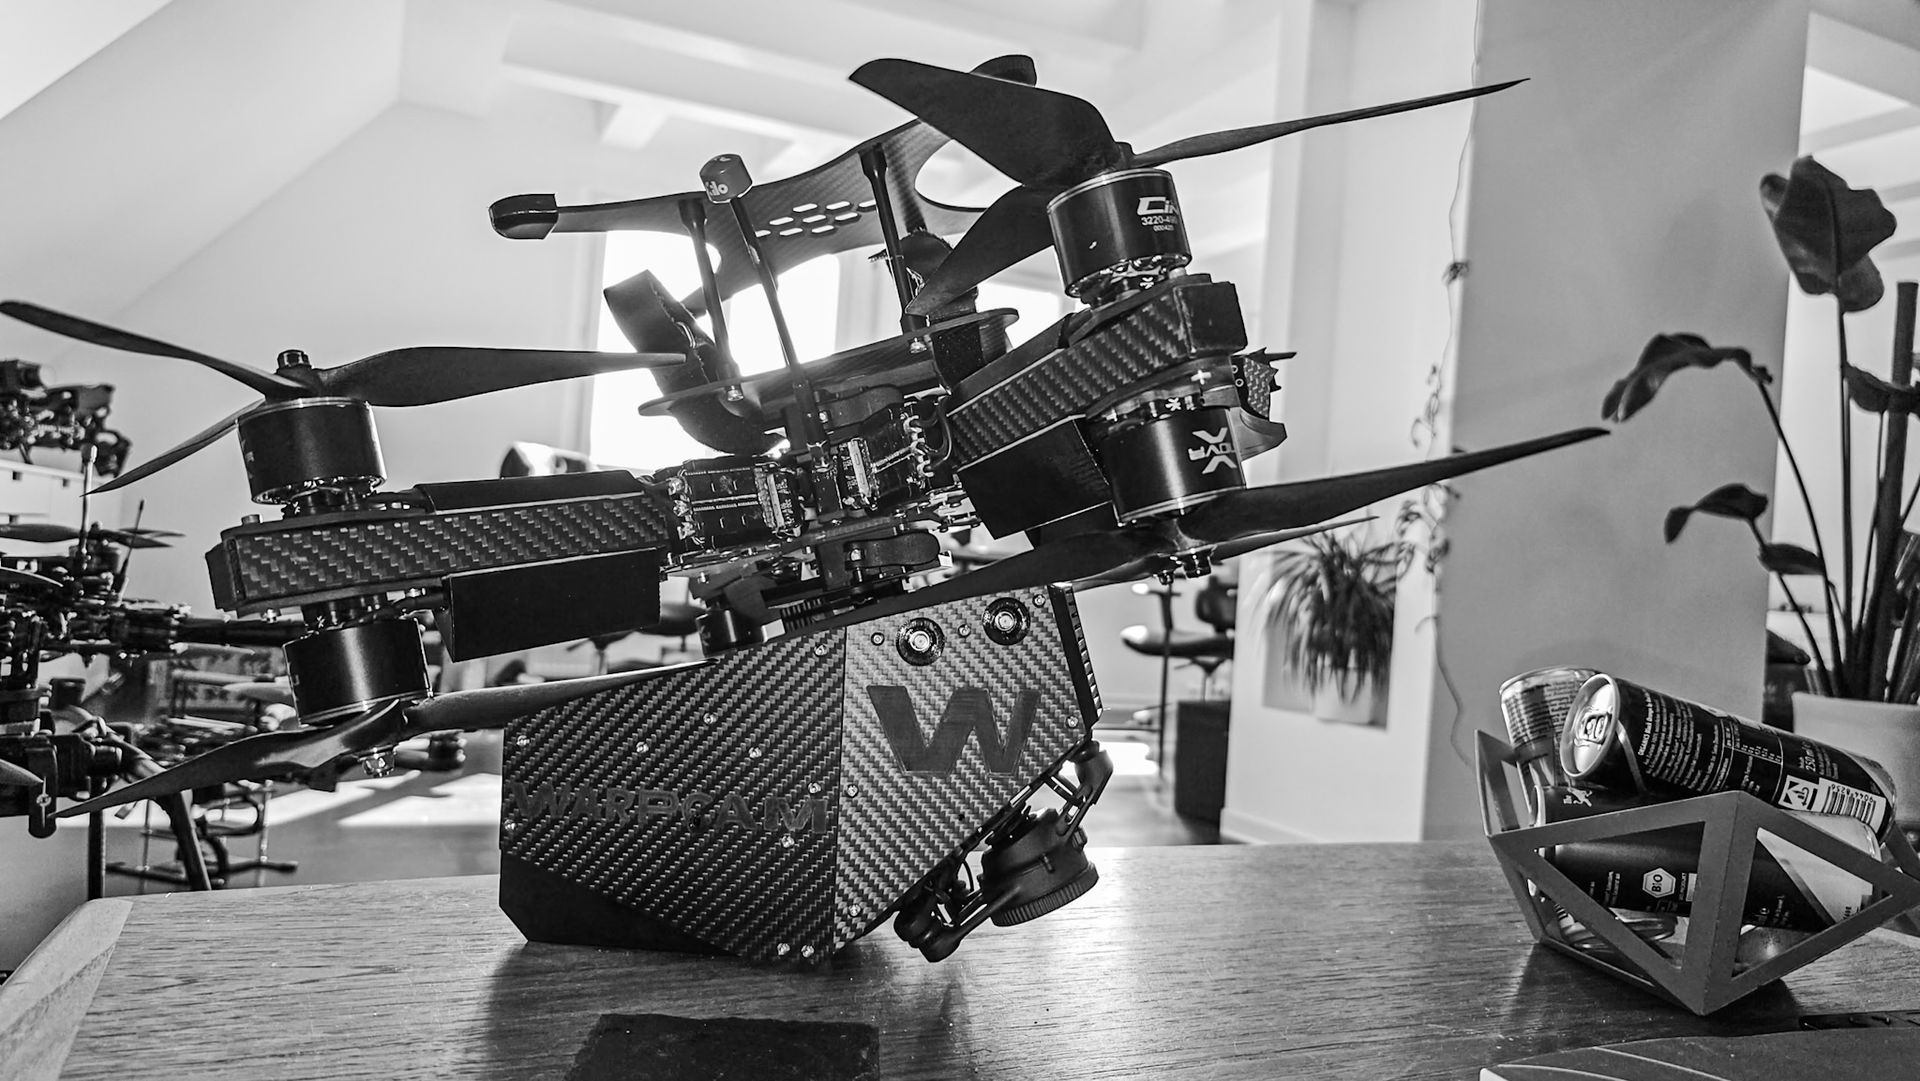 Cutting-edge WarpCam technology mounted on an FPV drone, ready to capture high-velocity stunt action from dynamic aerial perspectives.